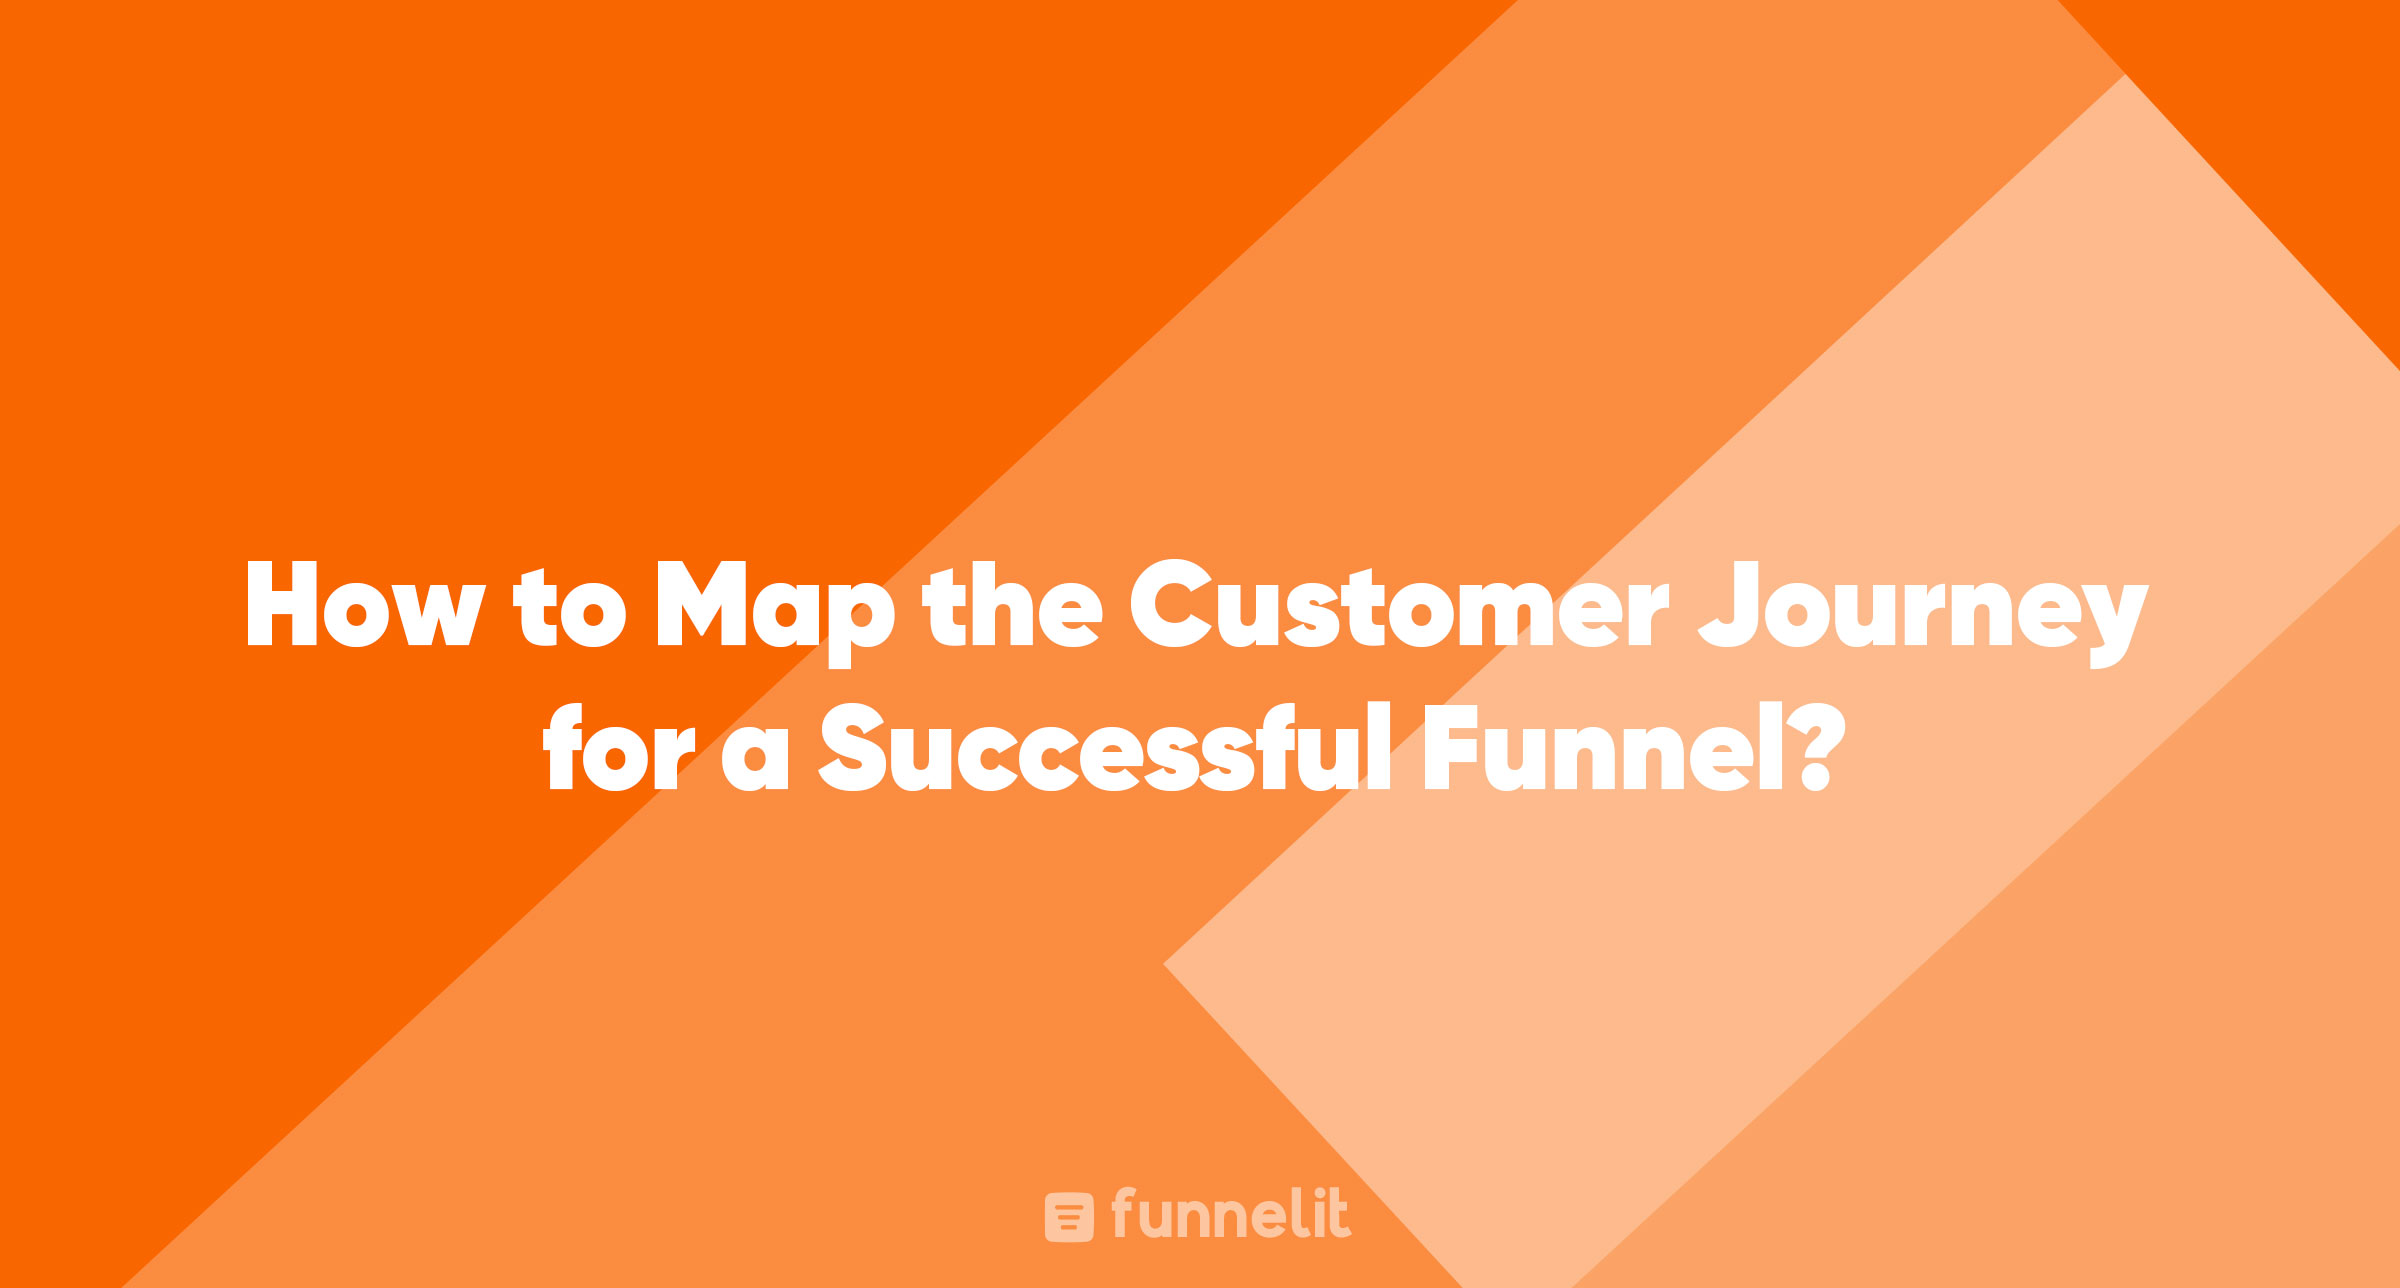 Article | How to Map the Customer Journey for a Successful Funnel?